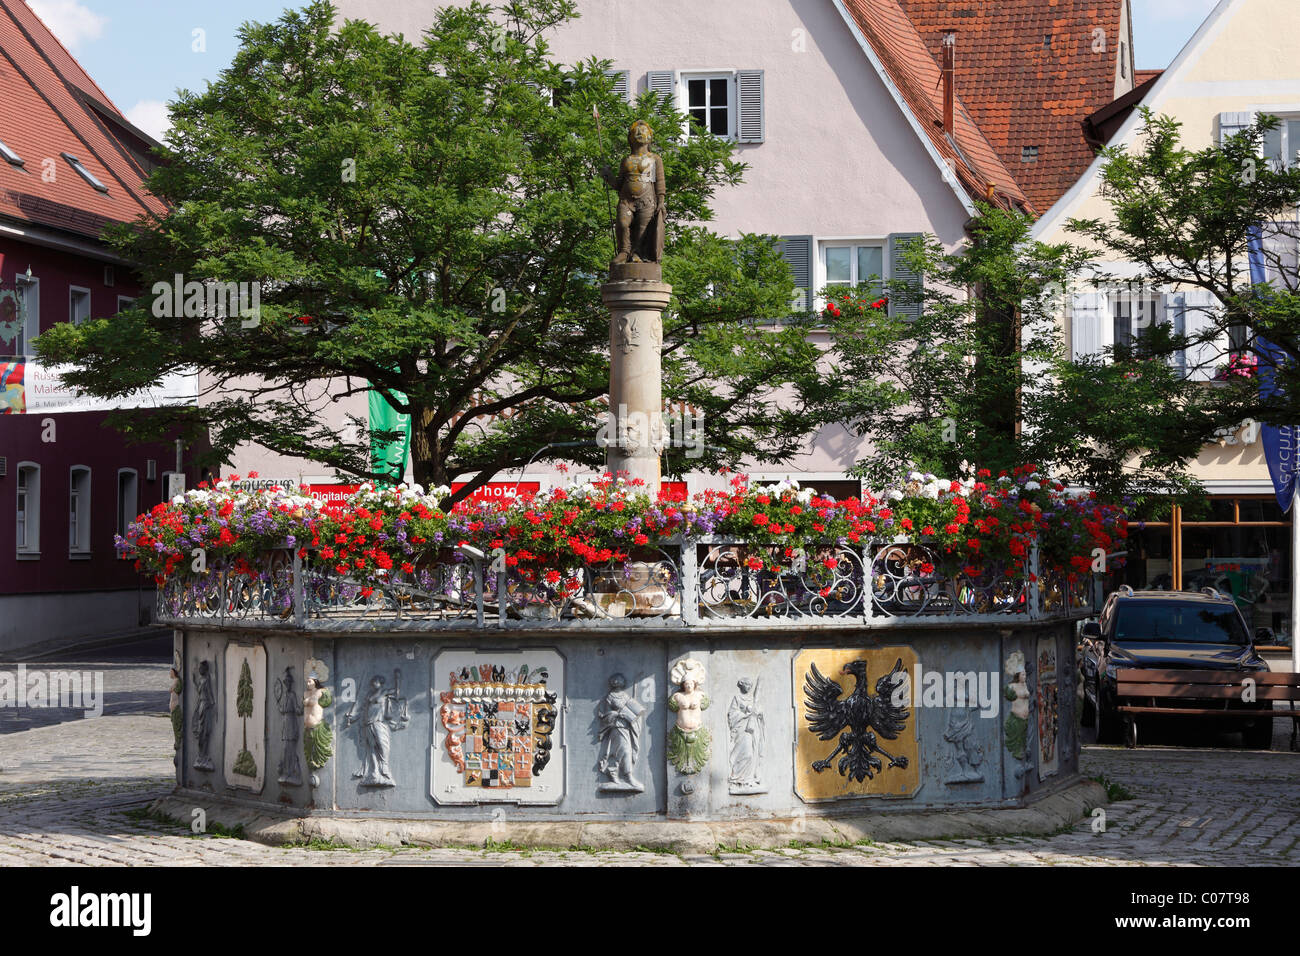 Roehrenbrunnen fountain on the market square, Feuchtwangen, Romantic Road, Middle Franconia, Franconia, Bavaria, Germany, Europe Stock Photo